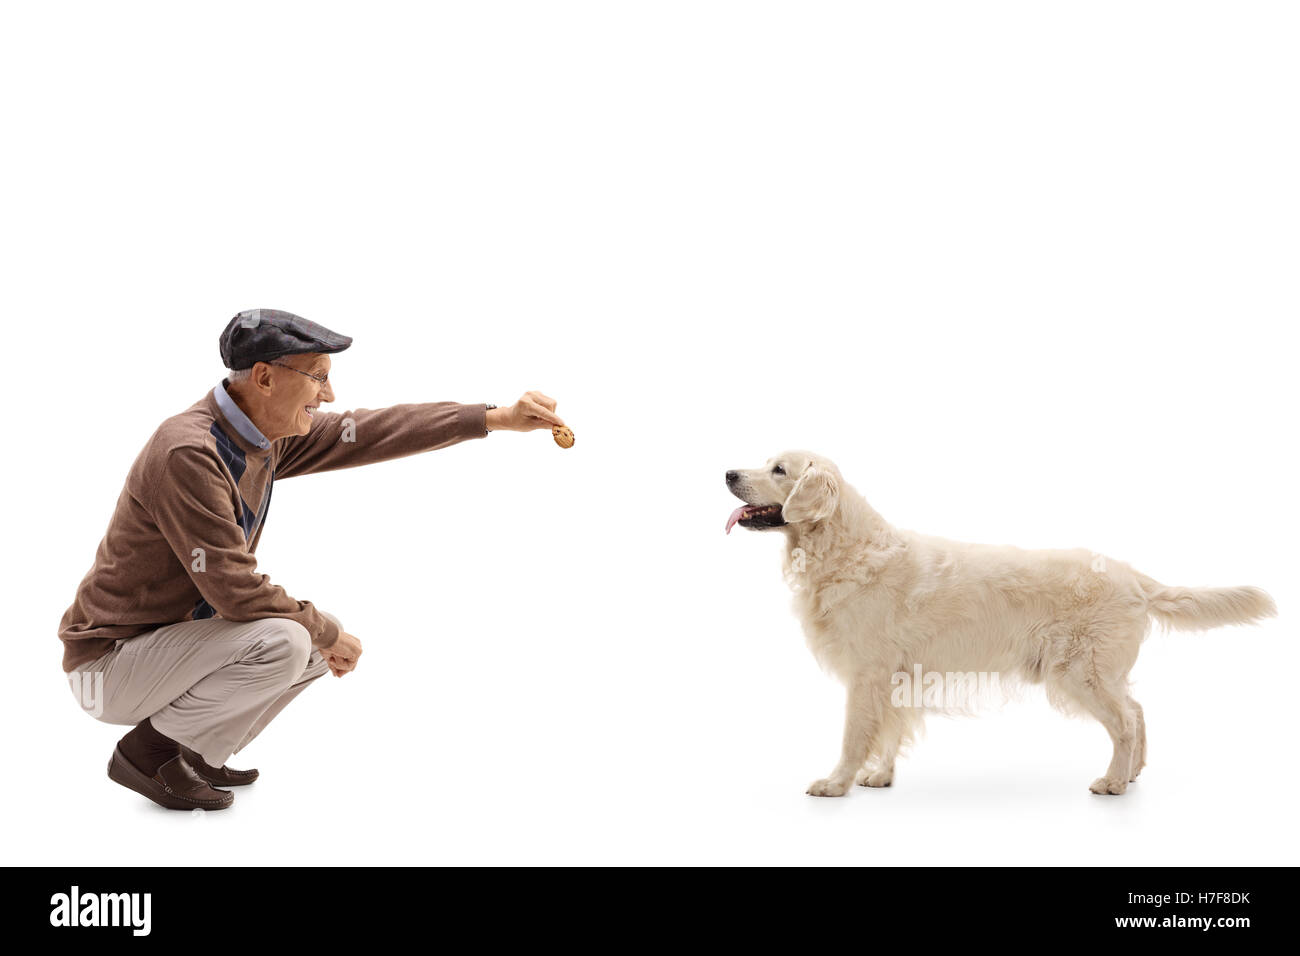 Mature man kneeling and giving a cookie to a dog isolated on white background Stock Photo